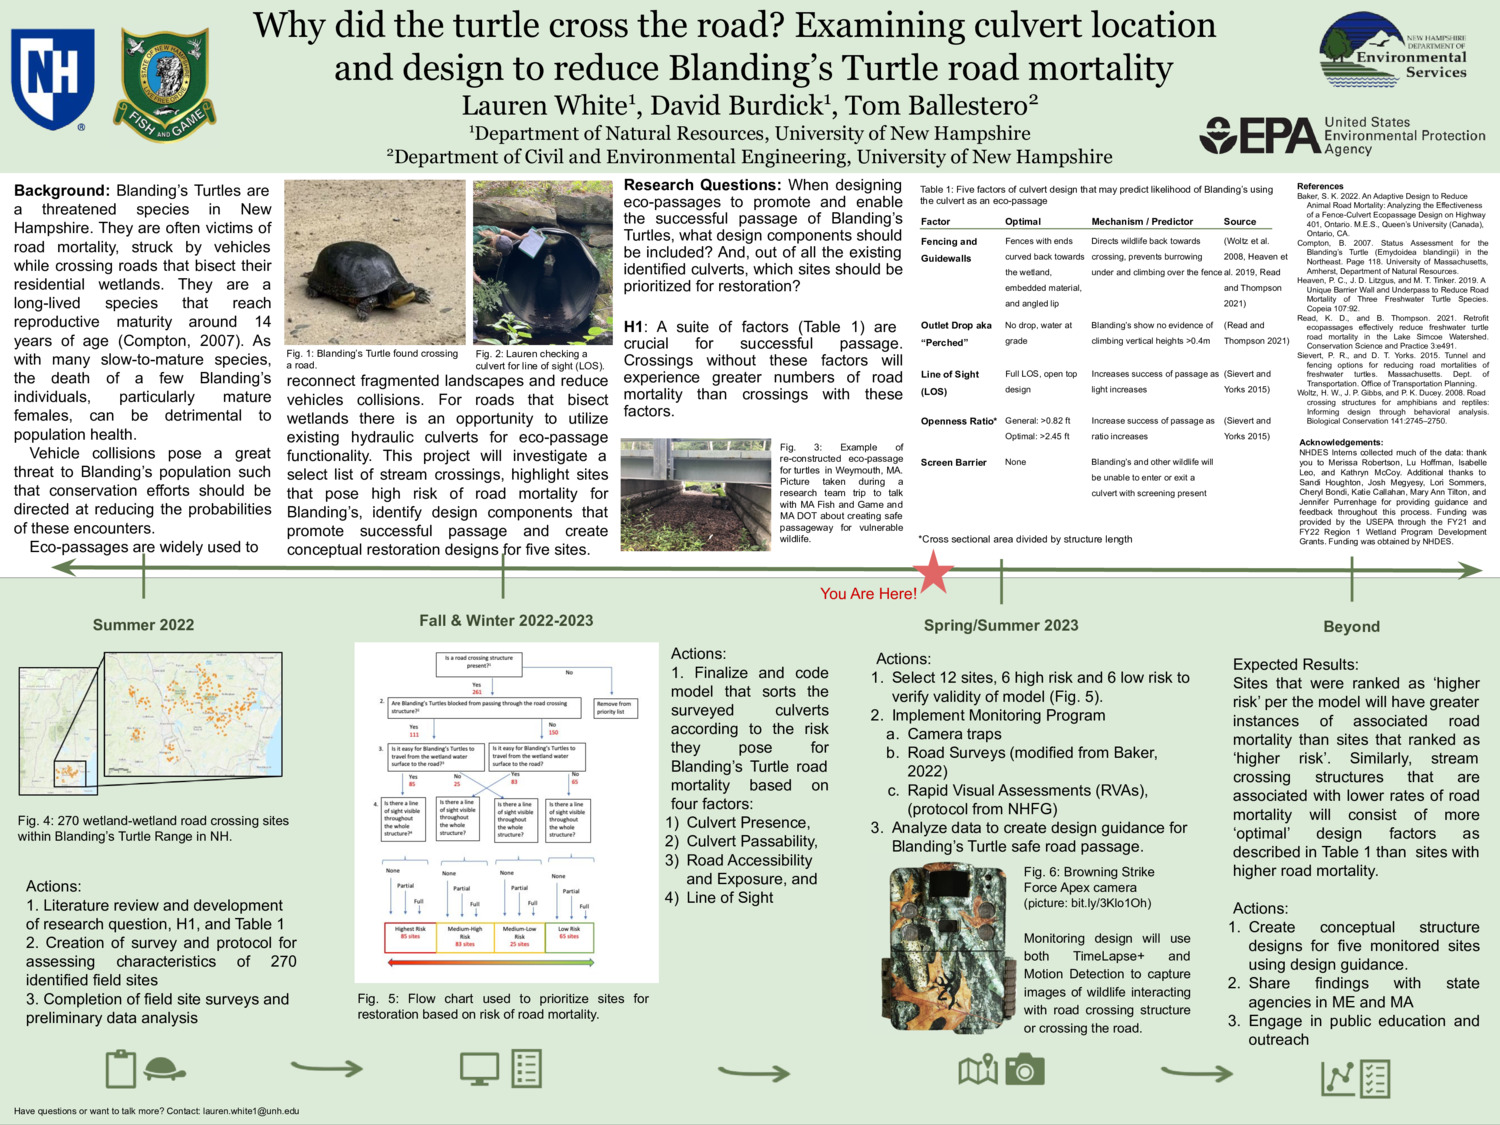 Why Did The Turtle Cross The Road? Examining Culvert Location And Design To Reduce Blanding's Turtle Road Mortality by laurenwhite1